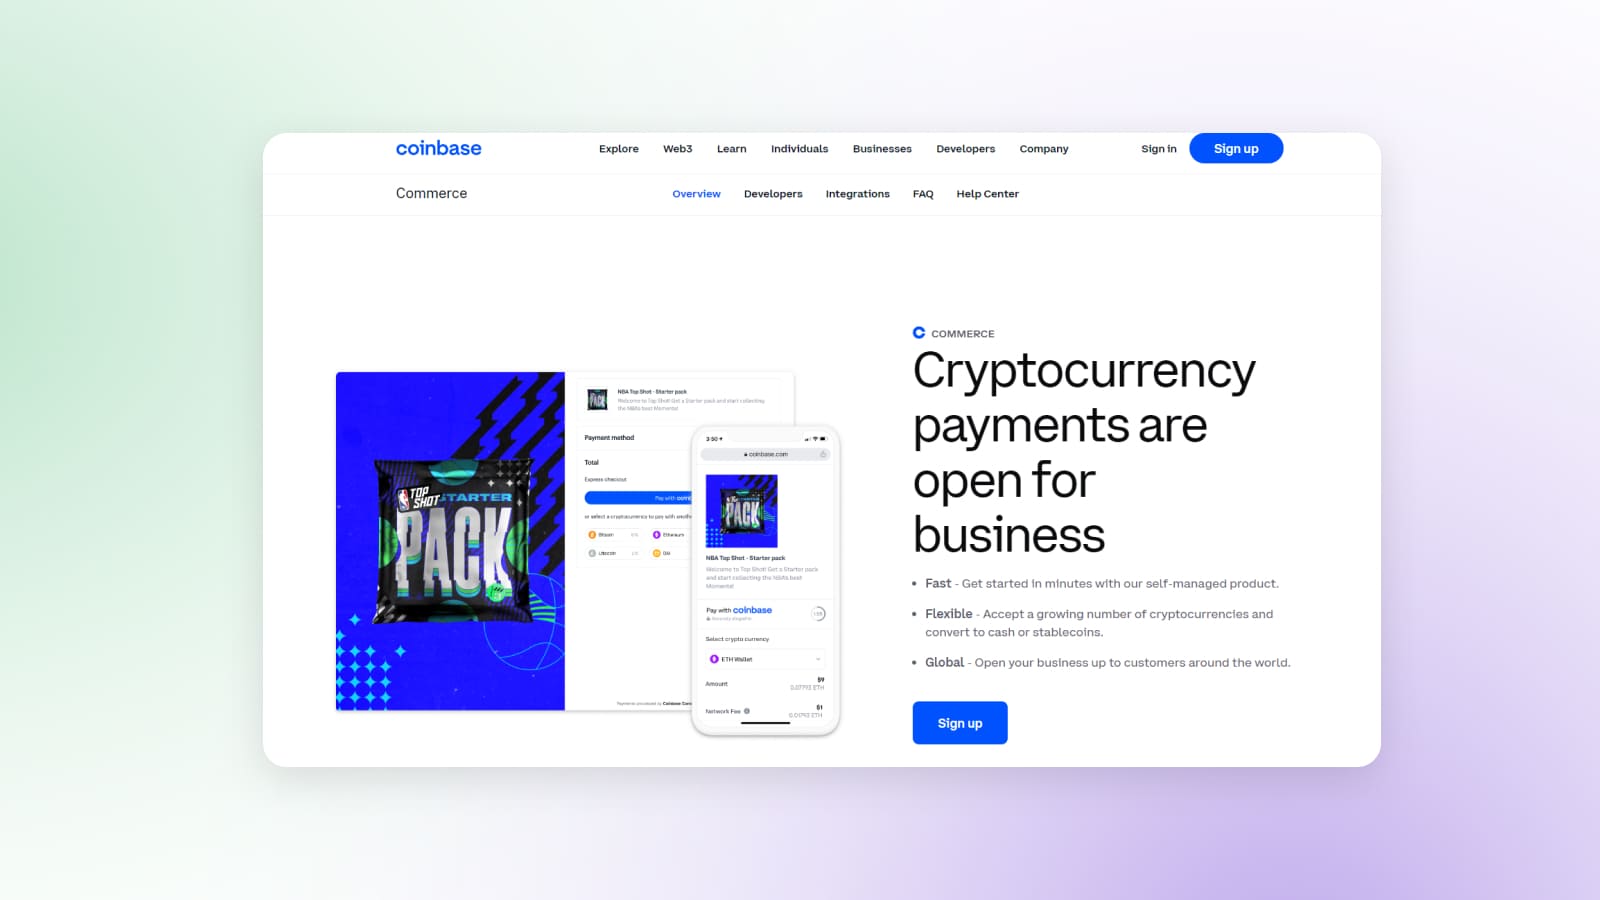 Coinbase is a cryptocurrency payment gateway, including for e-commerce.